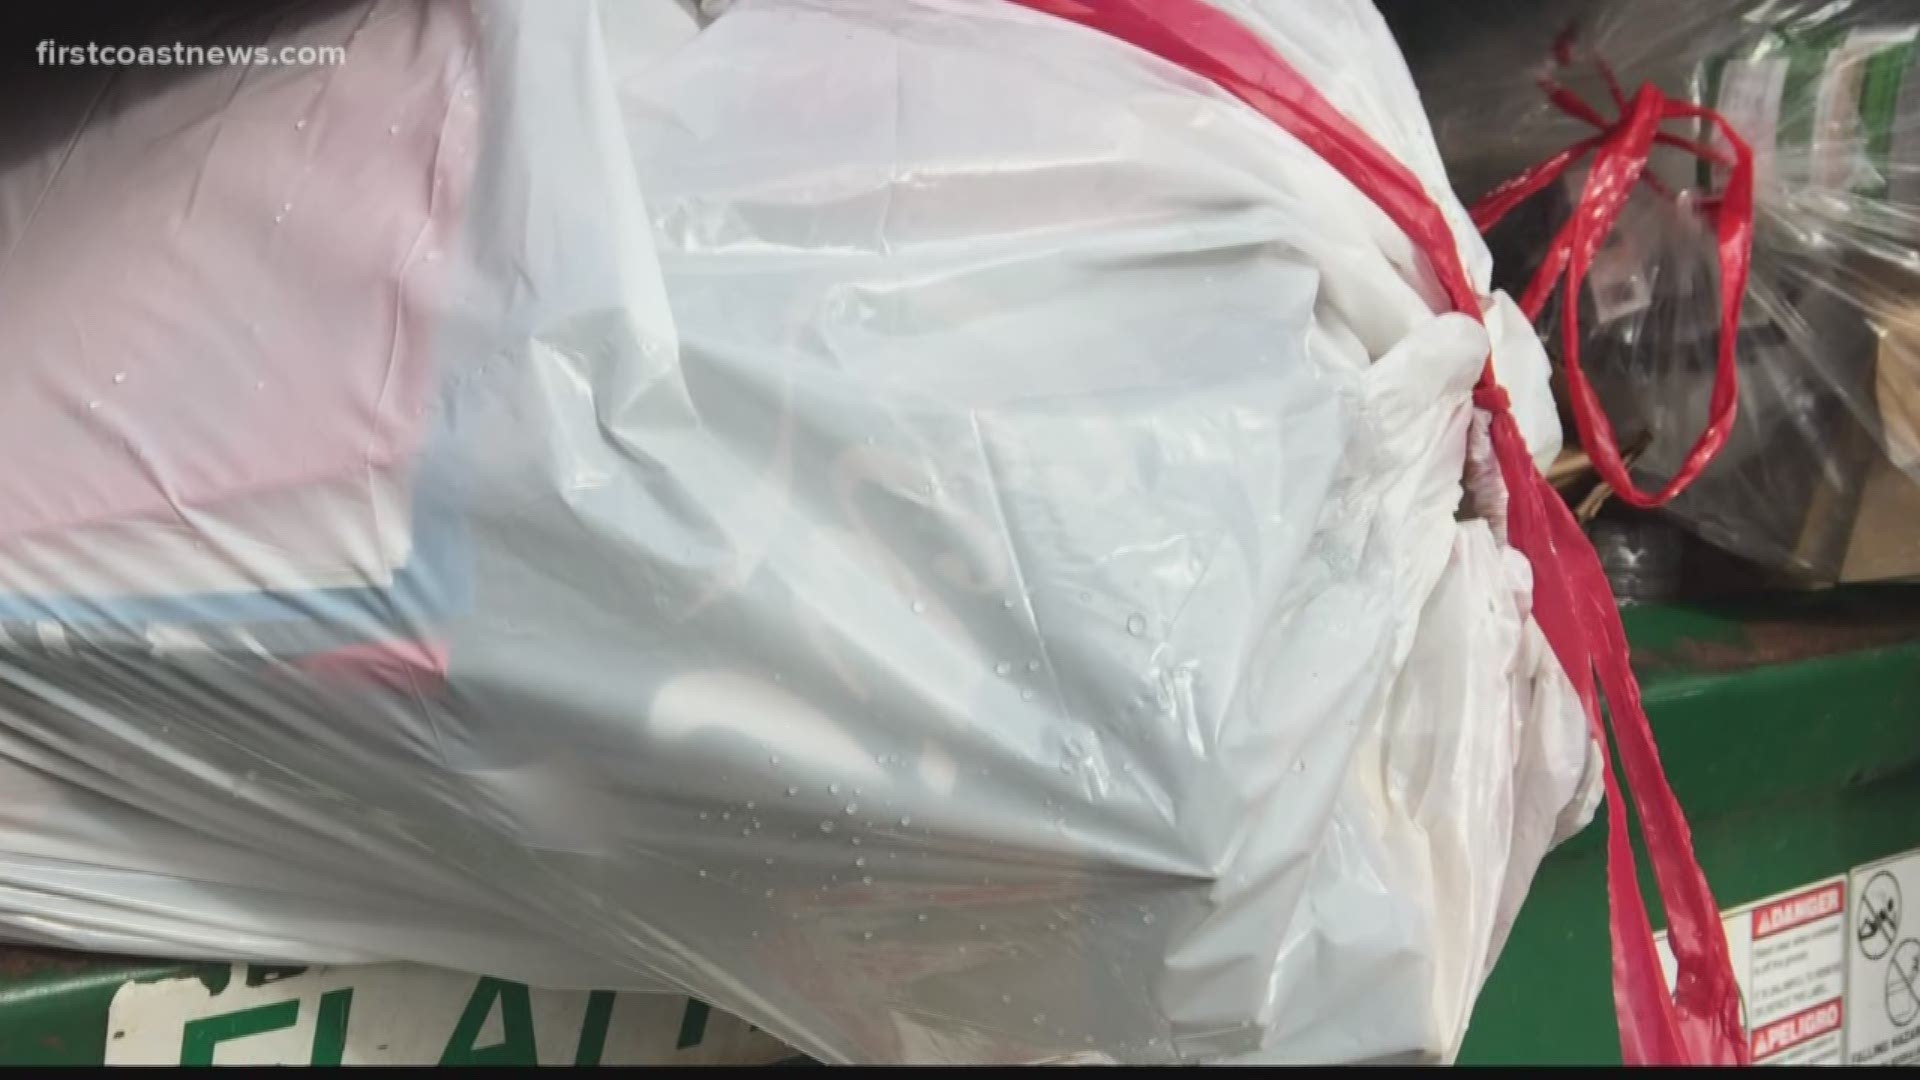 A lot of people in their homes will collect their recyclable items in plastic bags or trash bags. Then they dump it, but the plastic bags need to be separated.